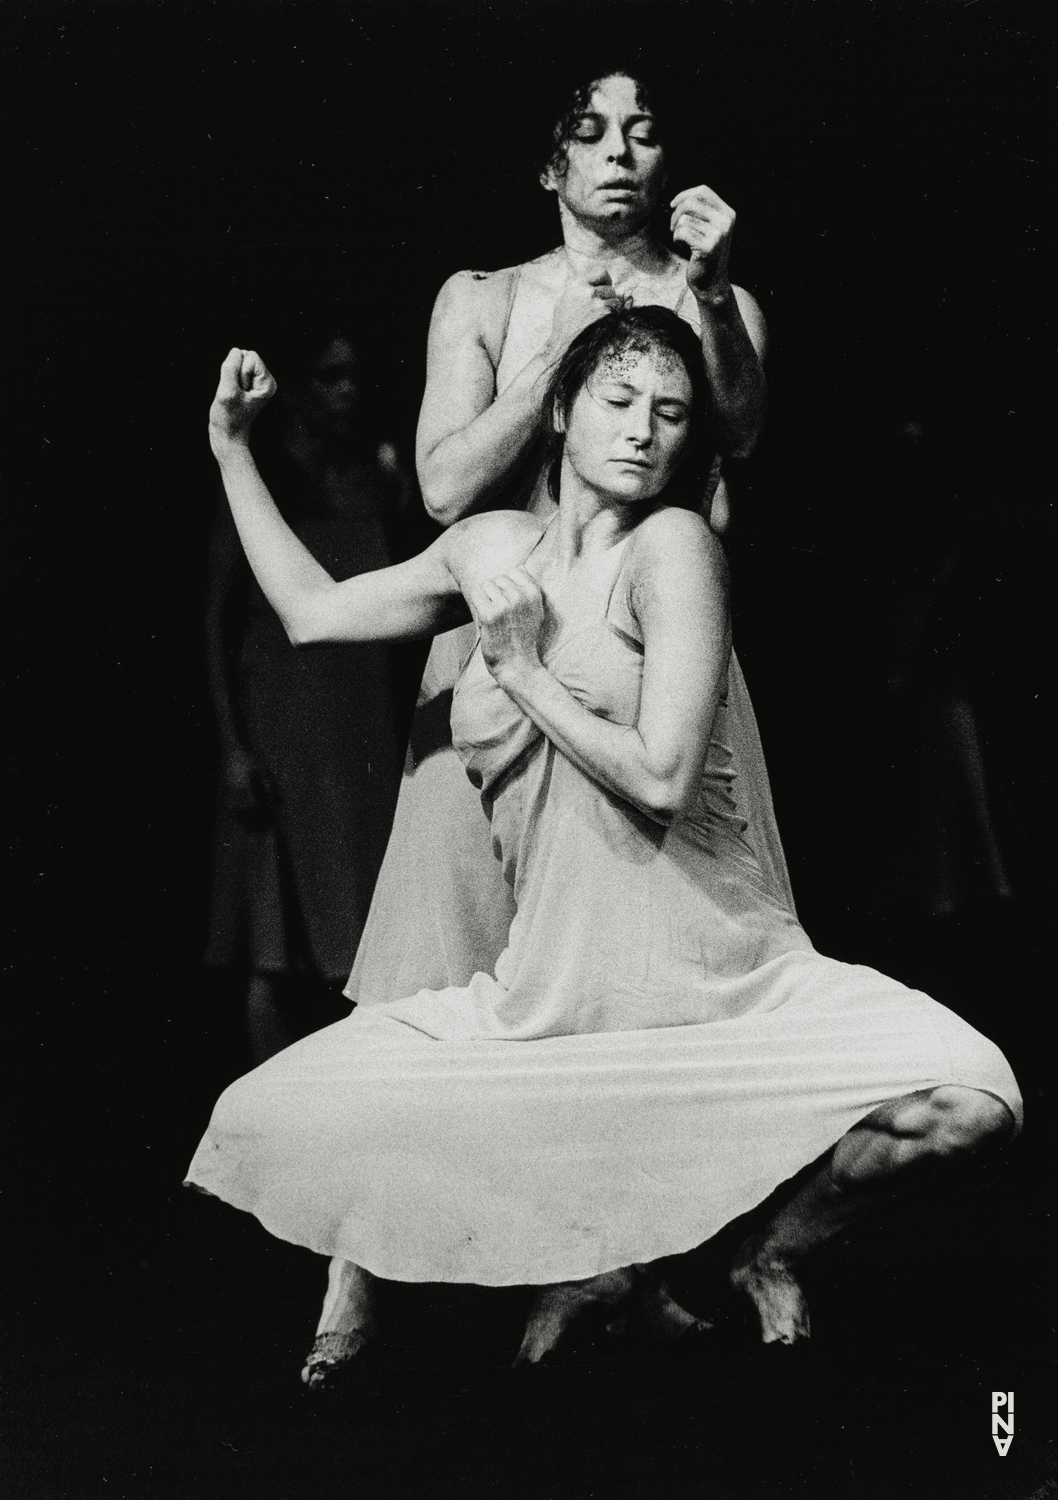 Aida Vainieri and Chrystel Guillebeaud in “The Rite of Spring” by Pina Bausch